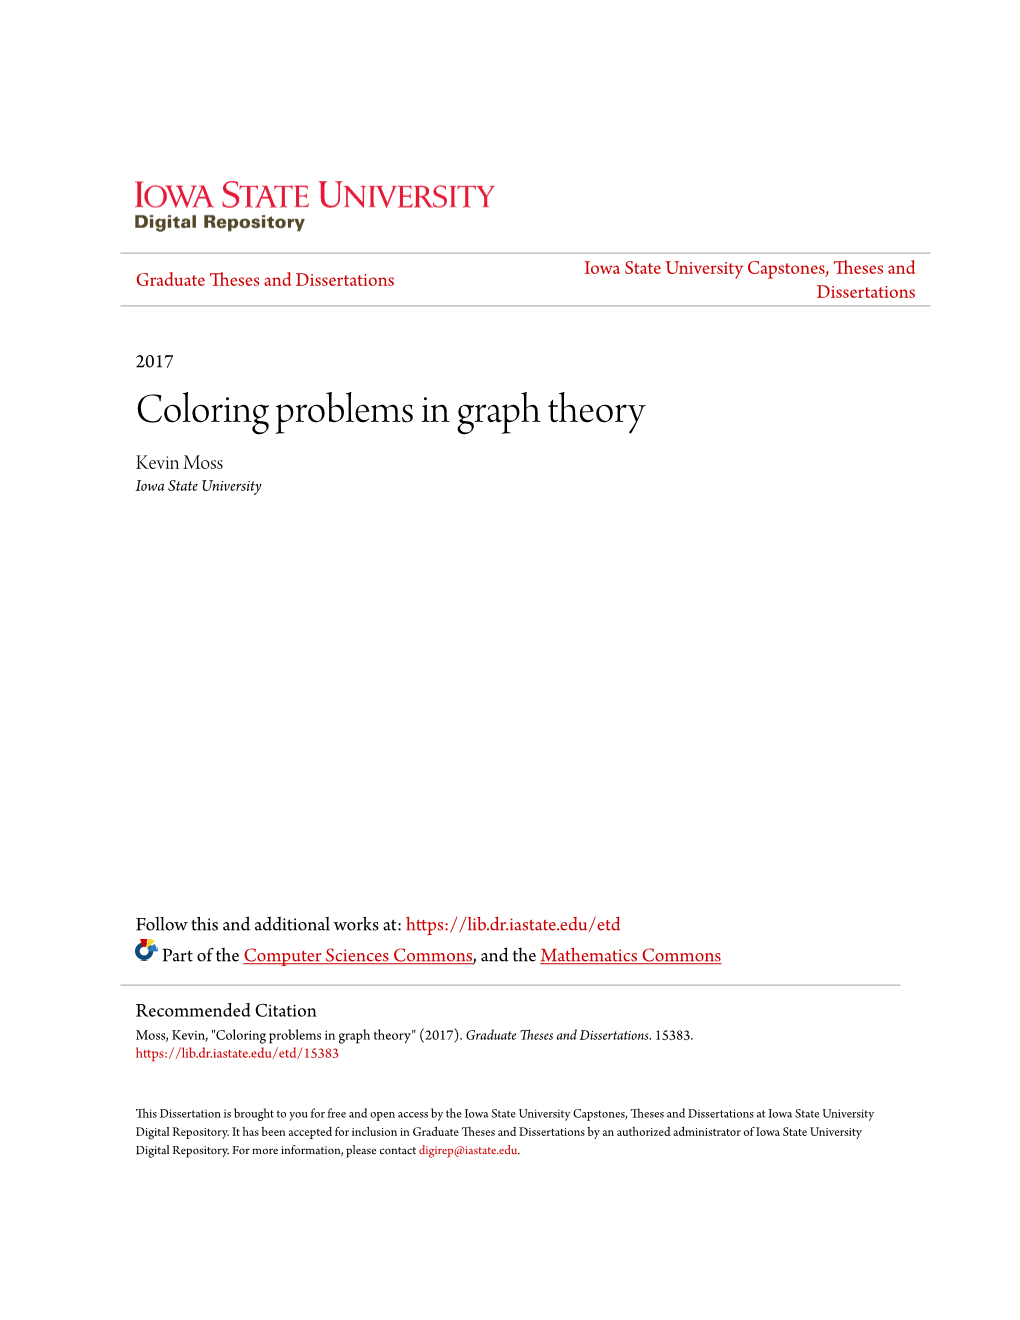 Coloring Problems in Graph Theory Kevin Moss Iowa State University